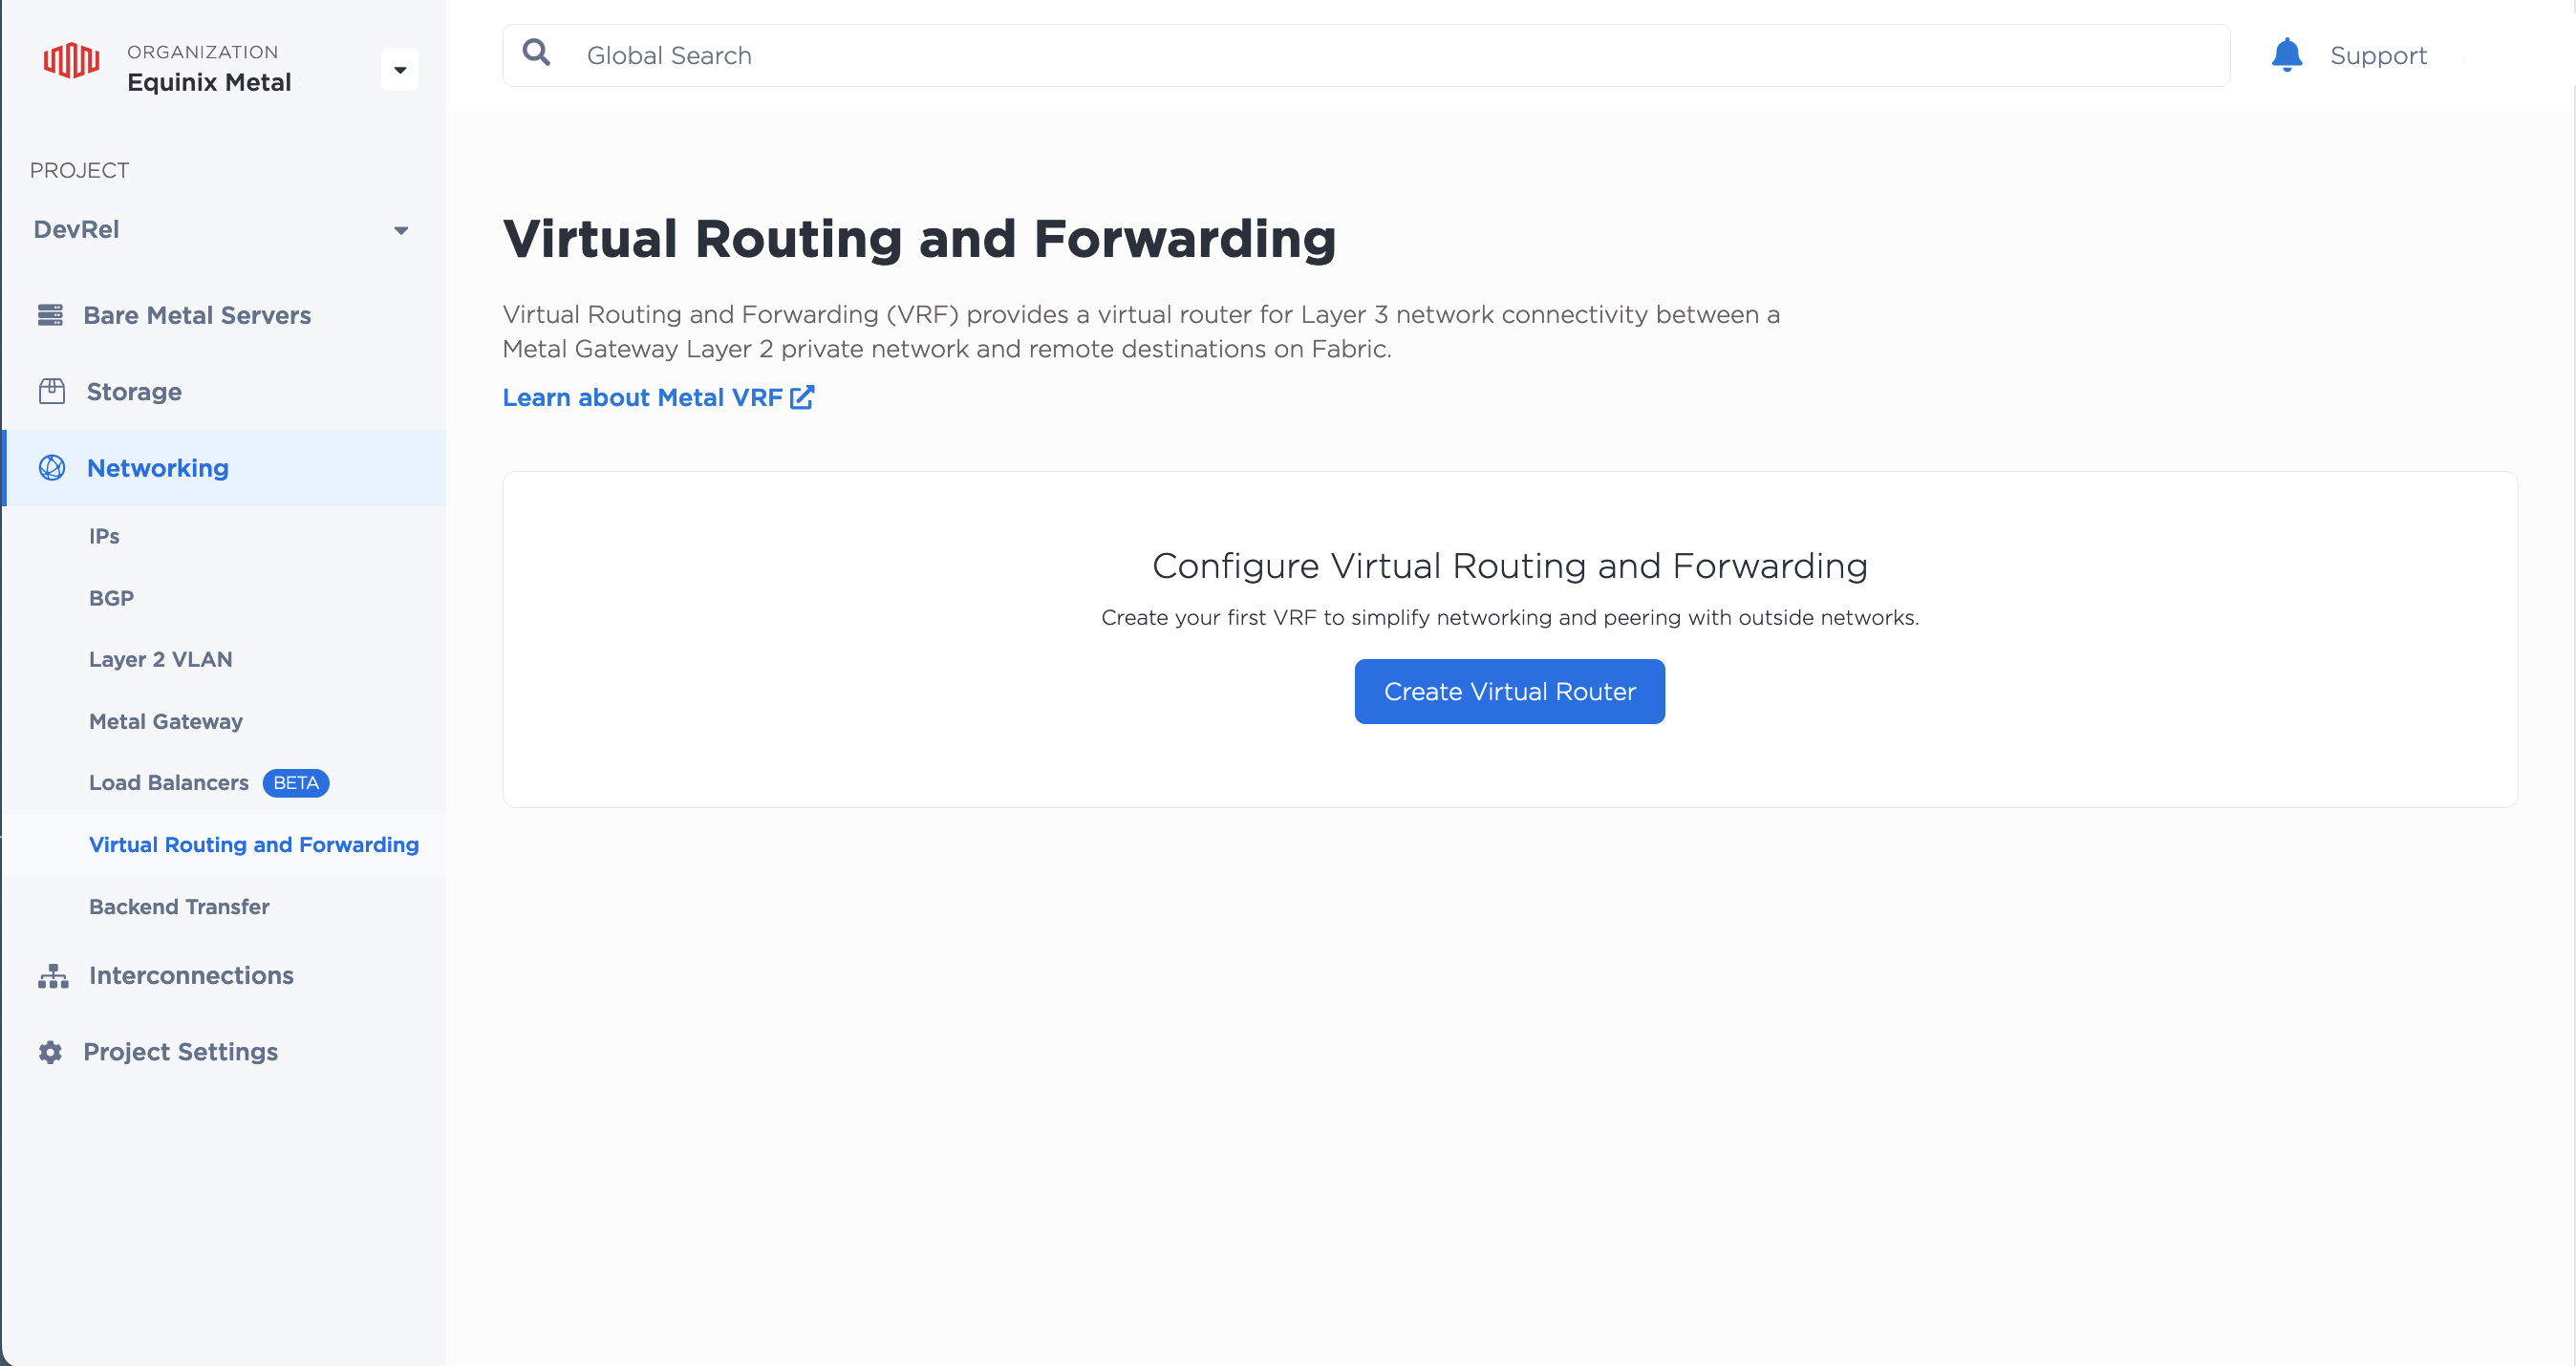 Virtual Routing and Forwarding in the Console